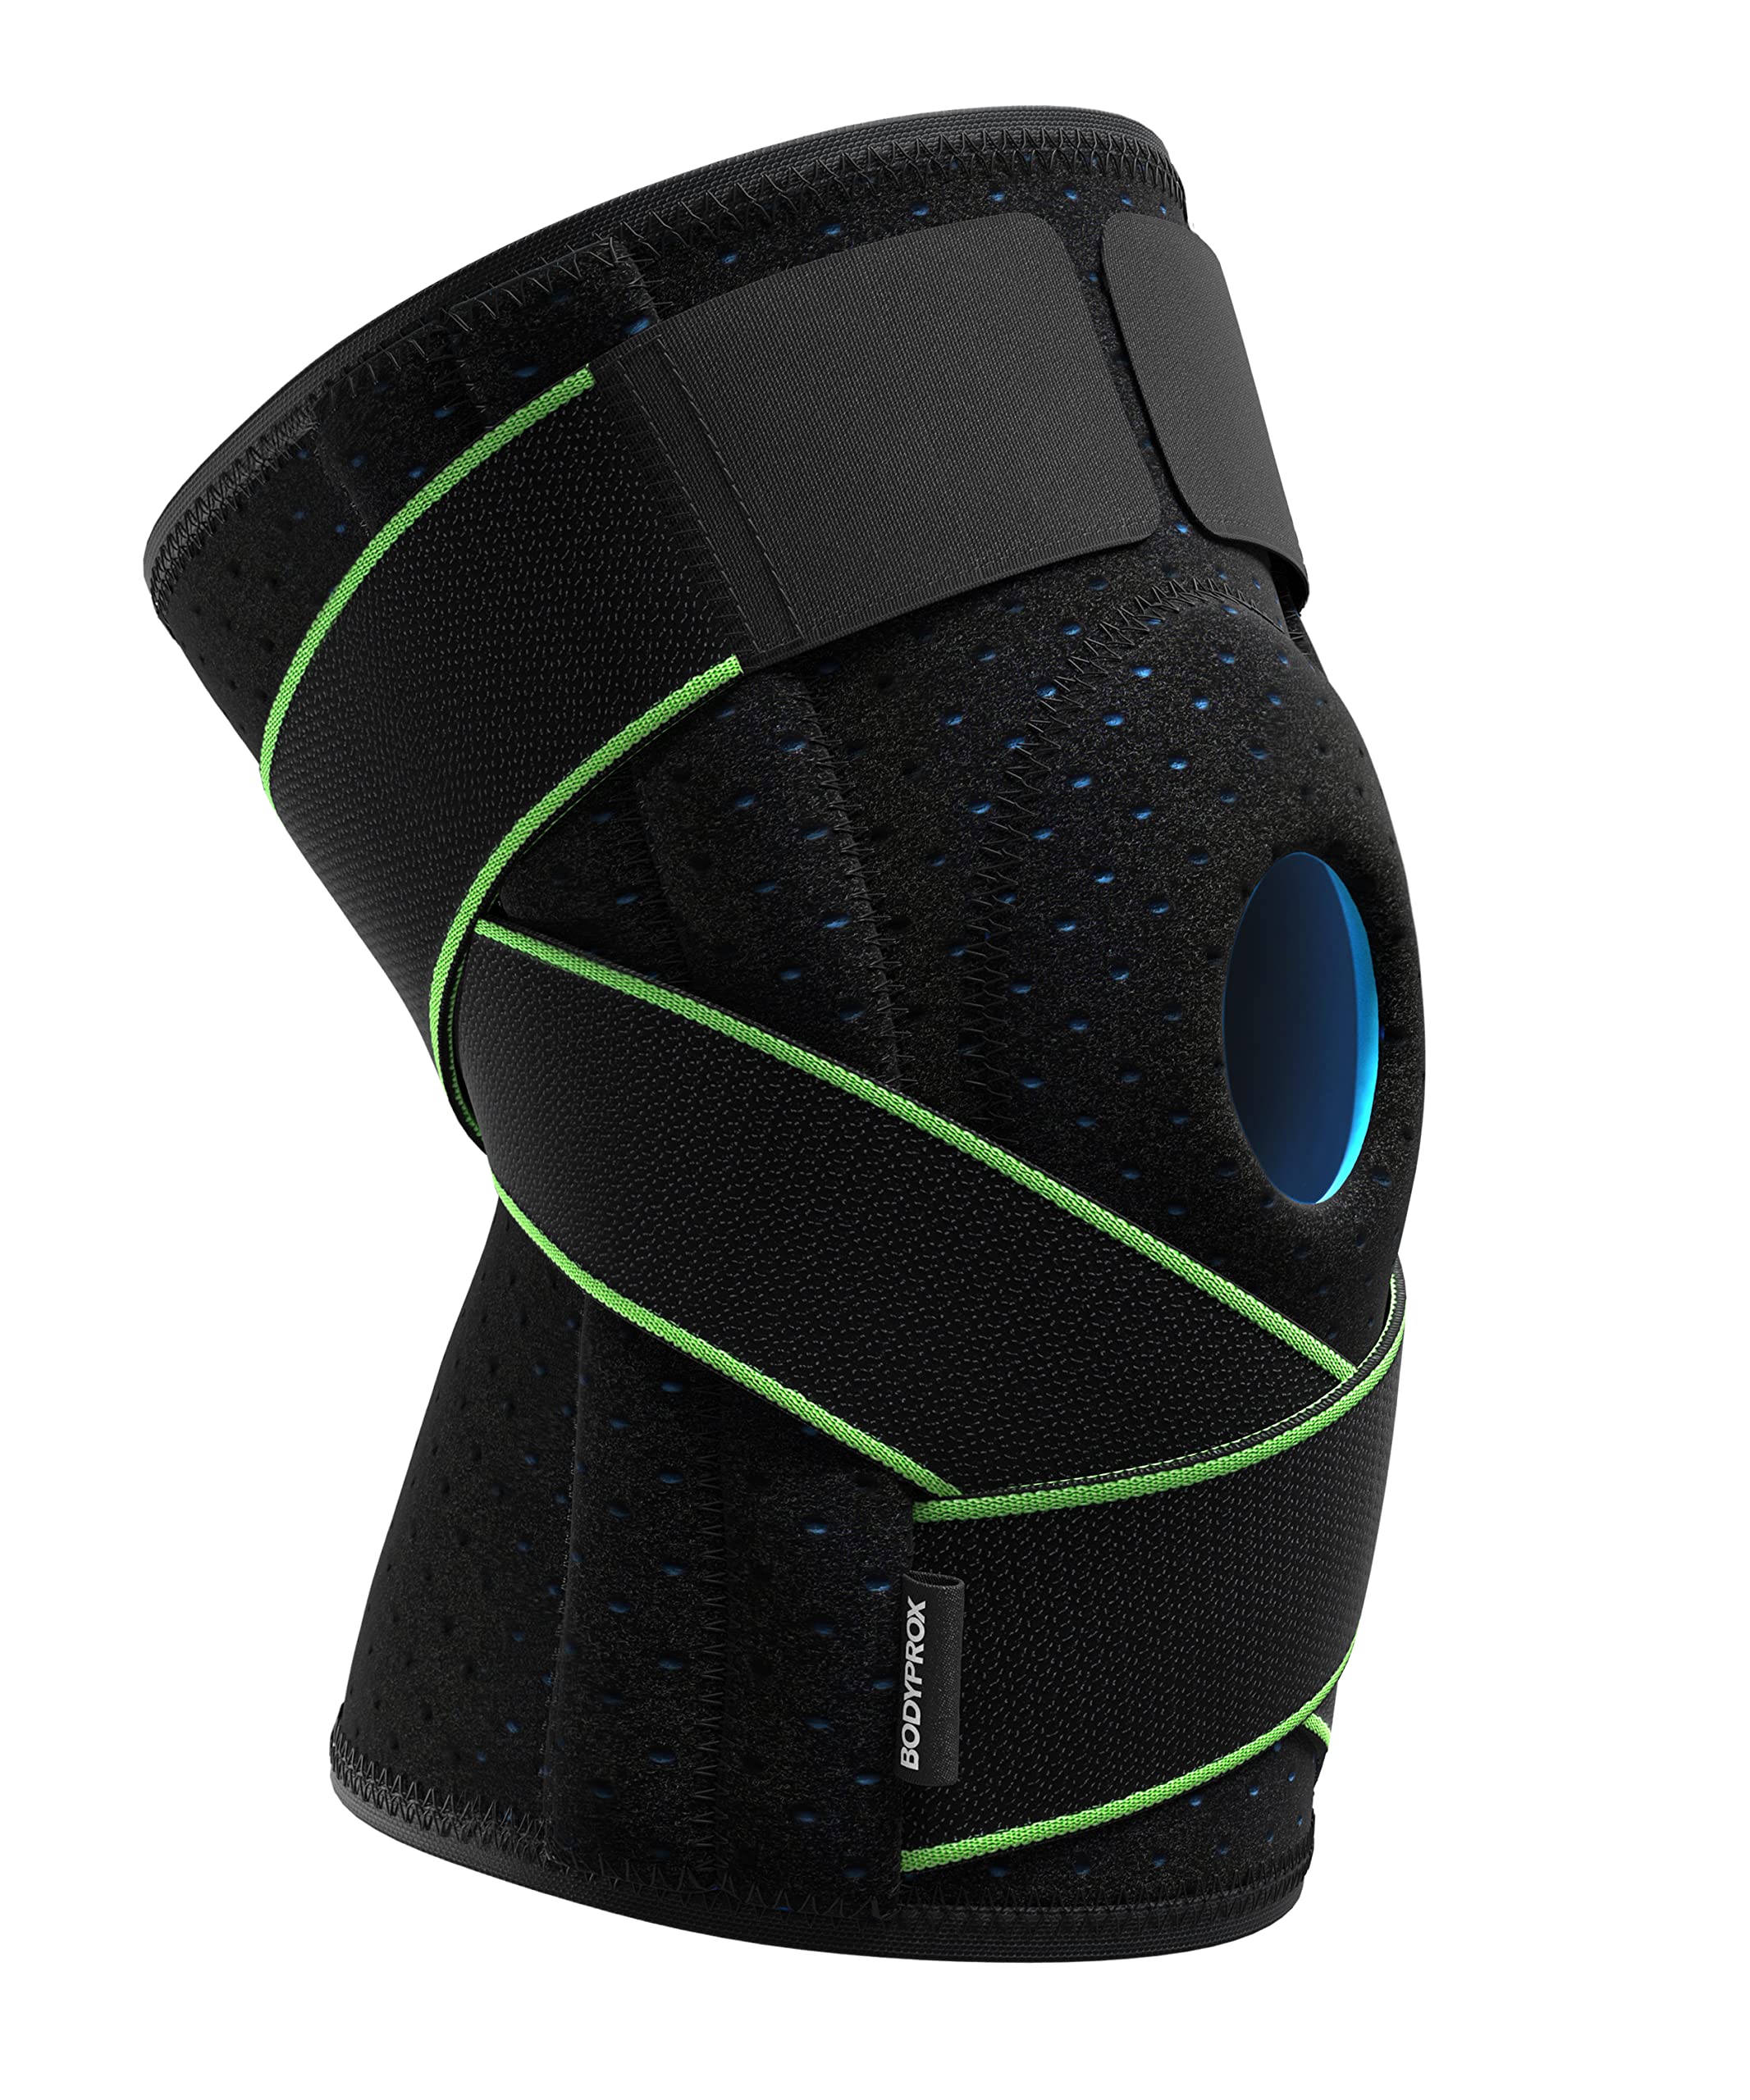 Bodyprox Knee Brace with Side Stabilizers & Patella Gel Pads for Knee Support (Extra Large)